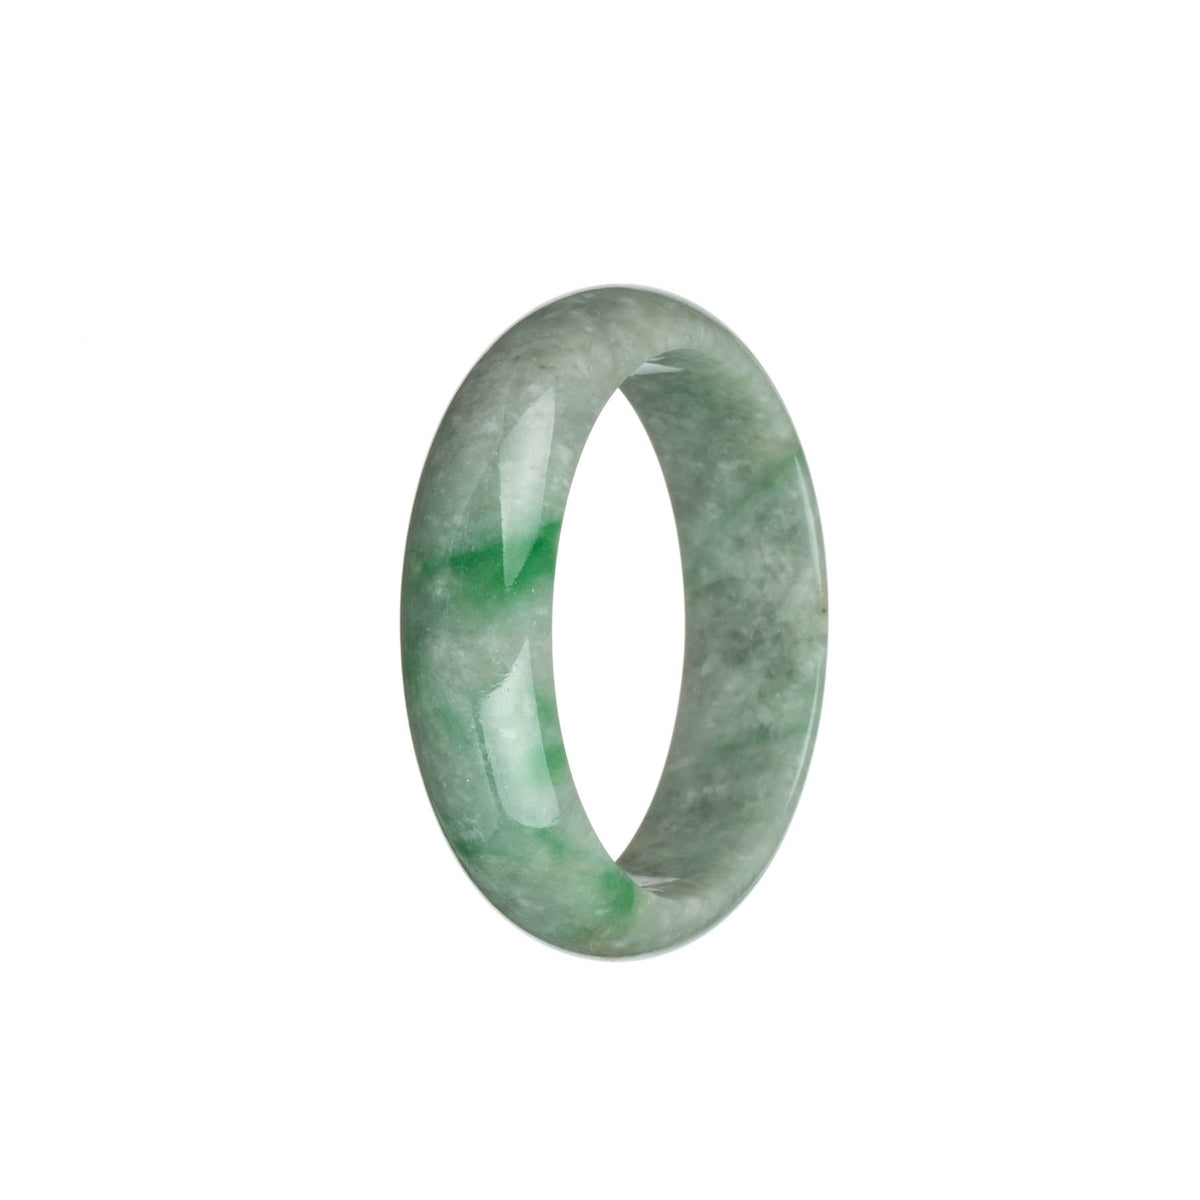 A half moon shaped Burmese jade bangle bracelet, featuring genuine natural light grey color with beautiful emerald green patterns and light brown patches.